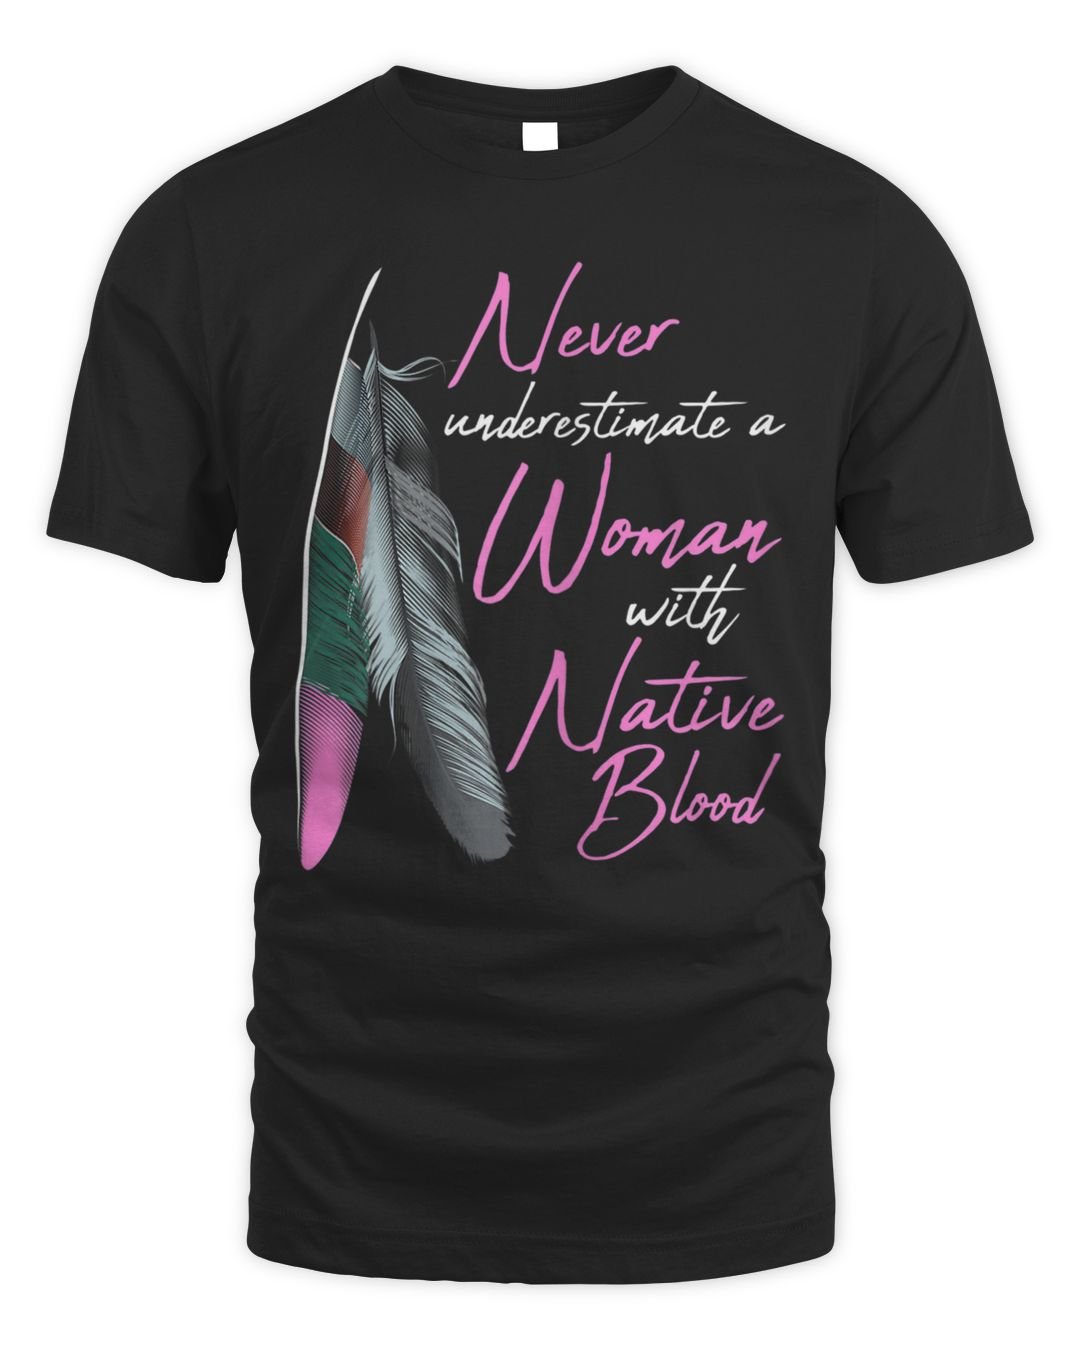 naa-oaw-13 Native American Indian A Woman With Native Blood | Native ...